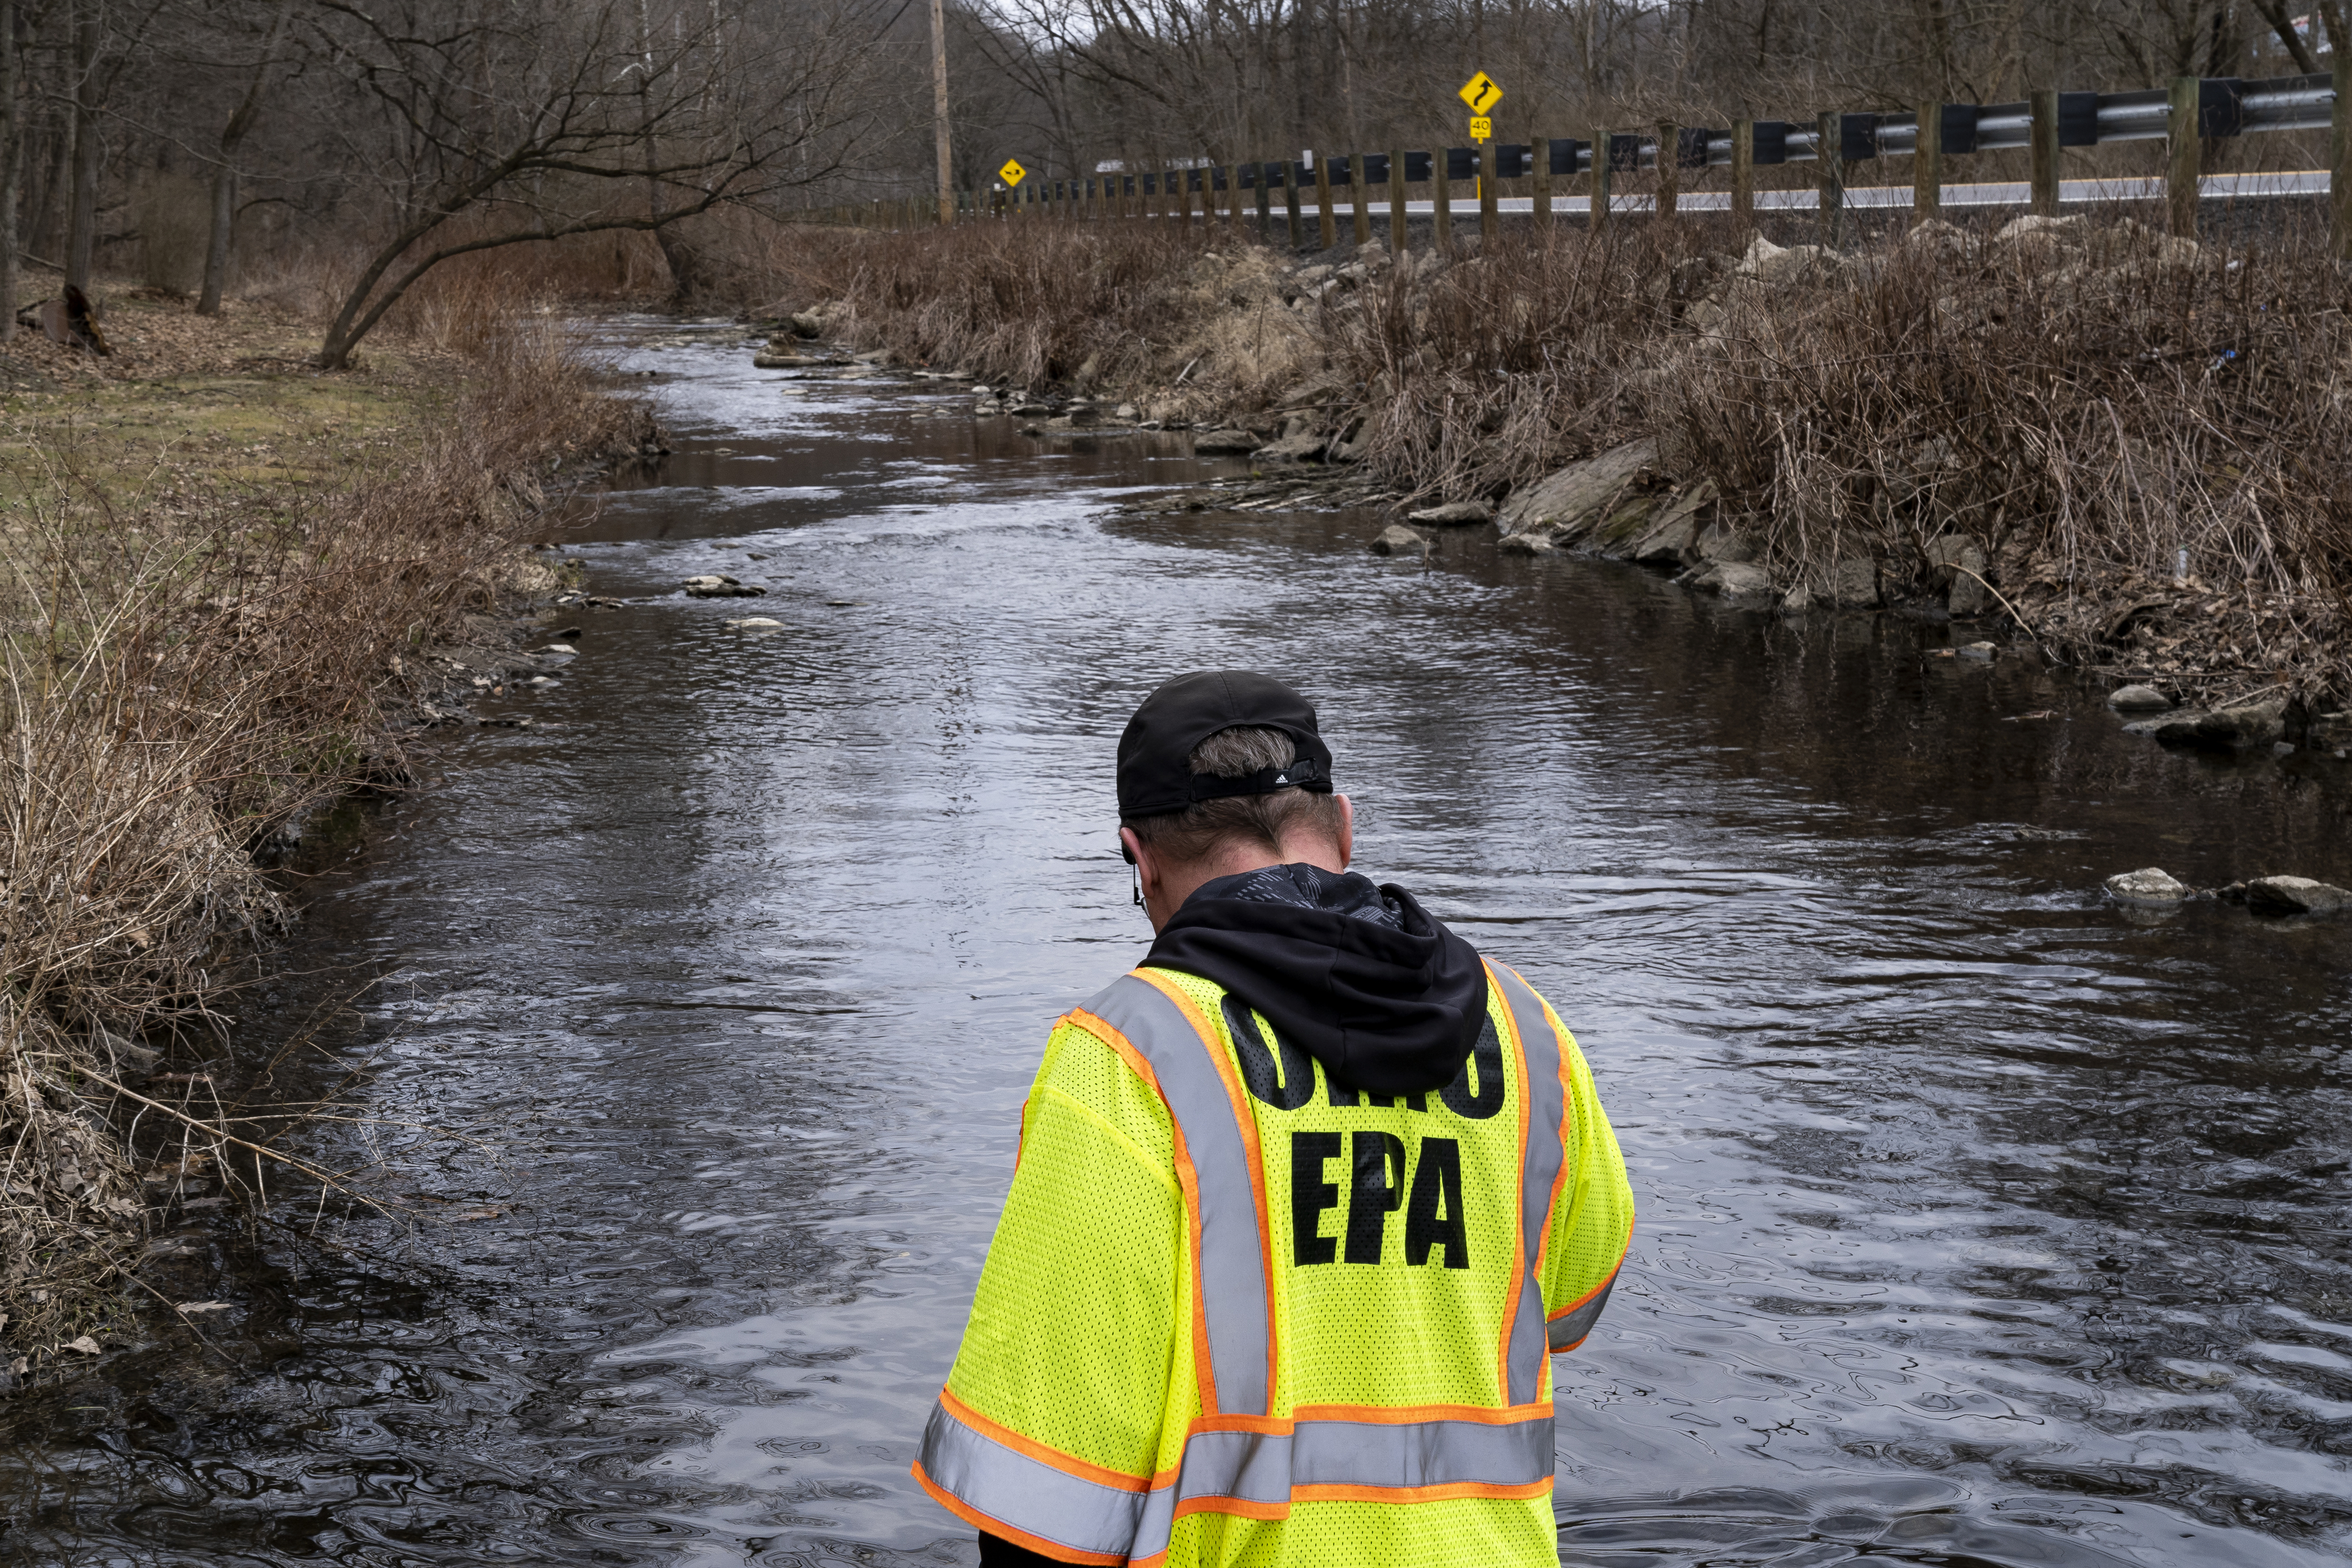 Ohio EPA Emergency Response, looks for signs of fish and also agitates the water in Leslie Run creek to check for chemicals